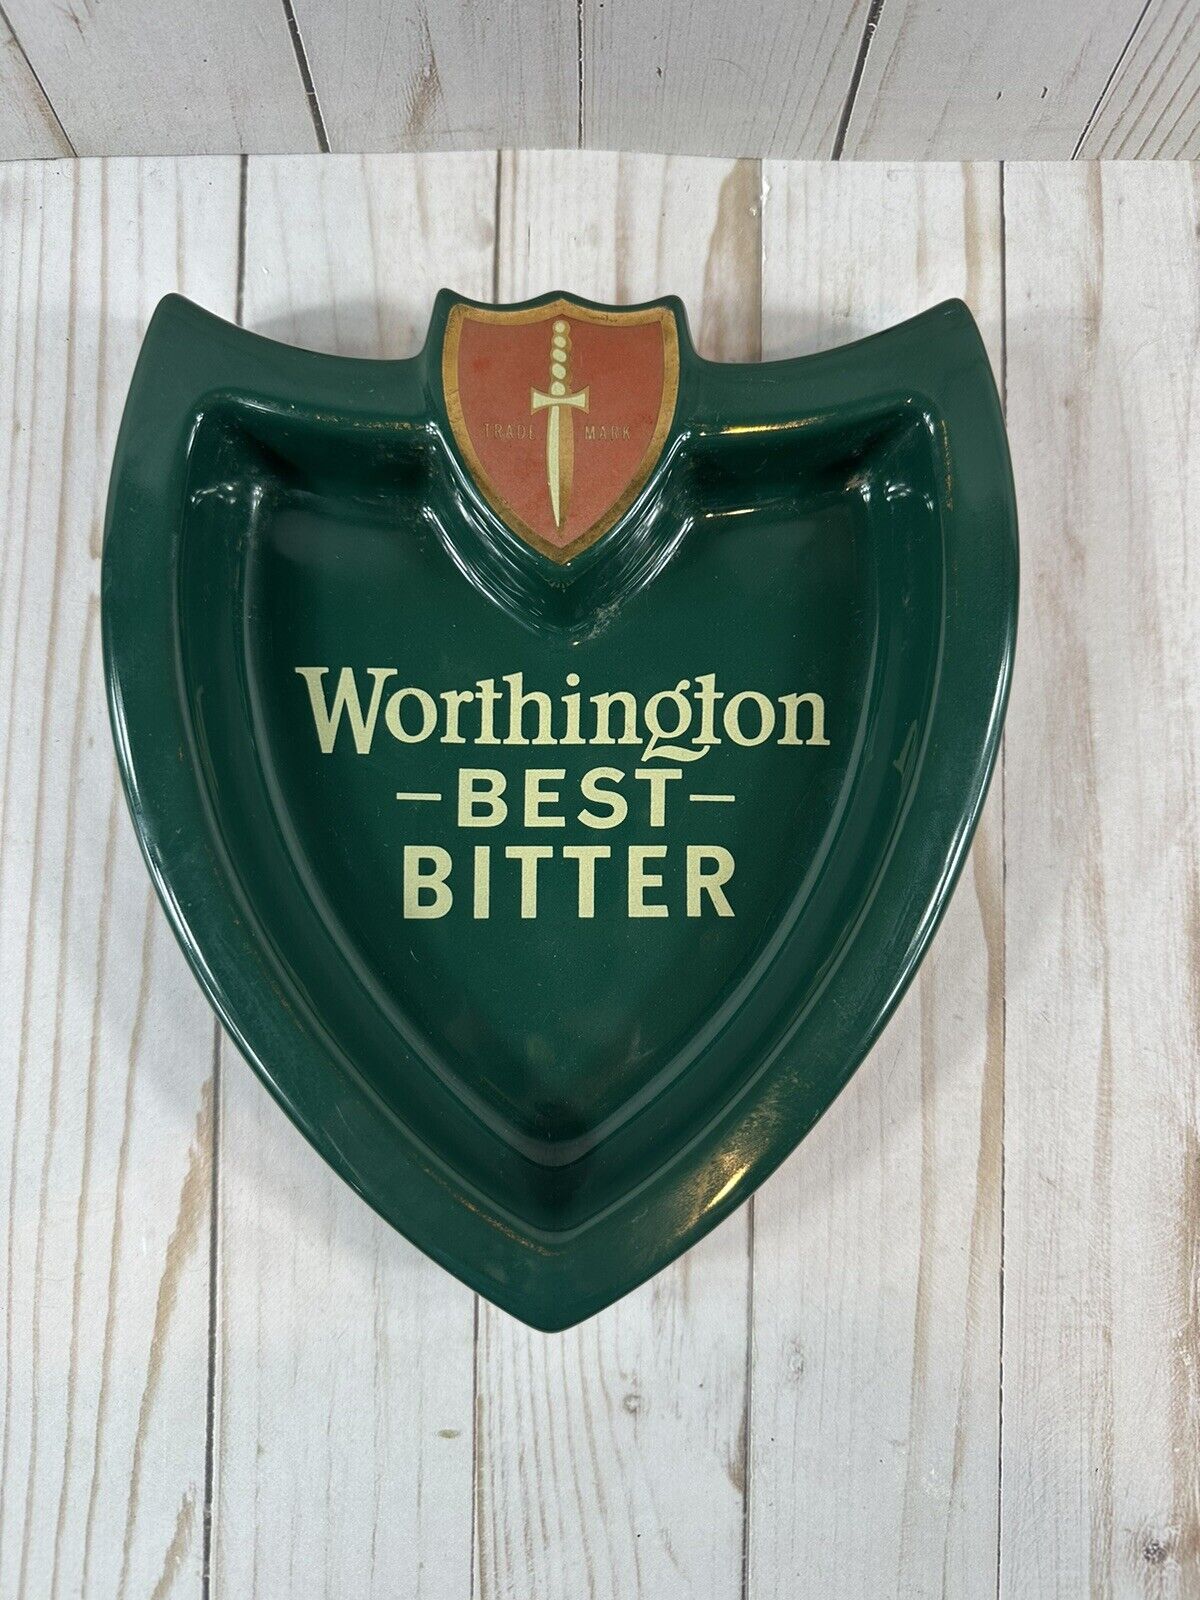 Vintage Worthington Best Bitter Ashtray, made in Great Britain